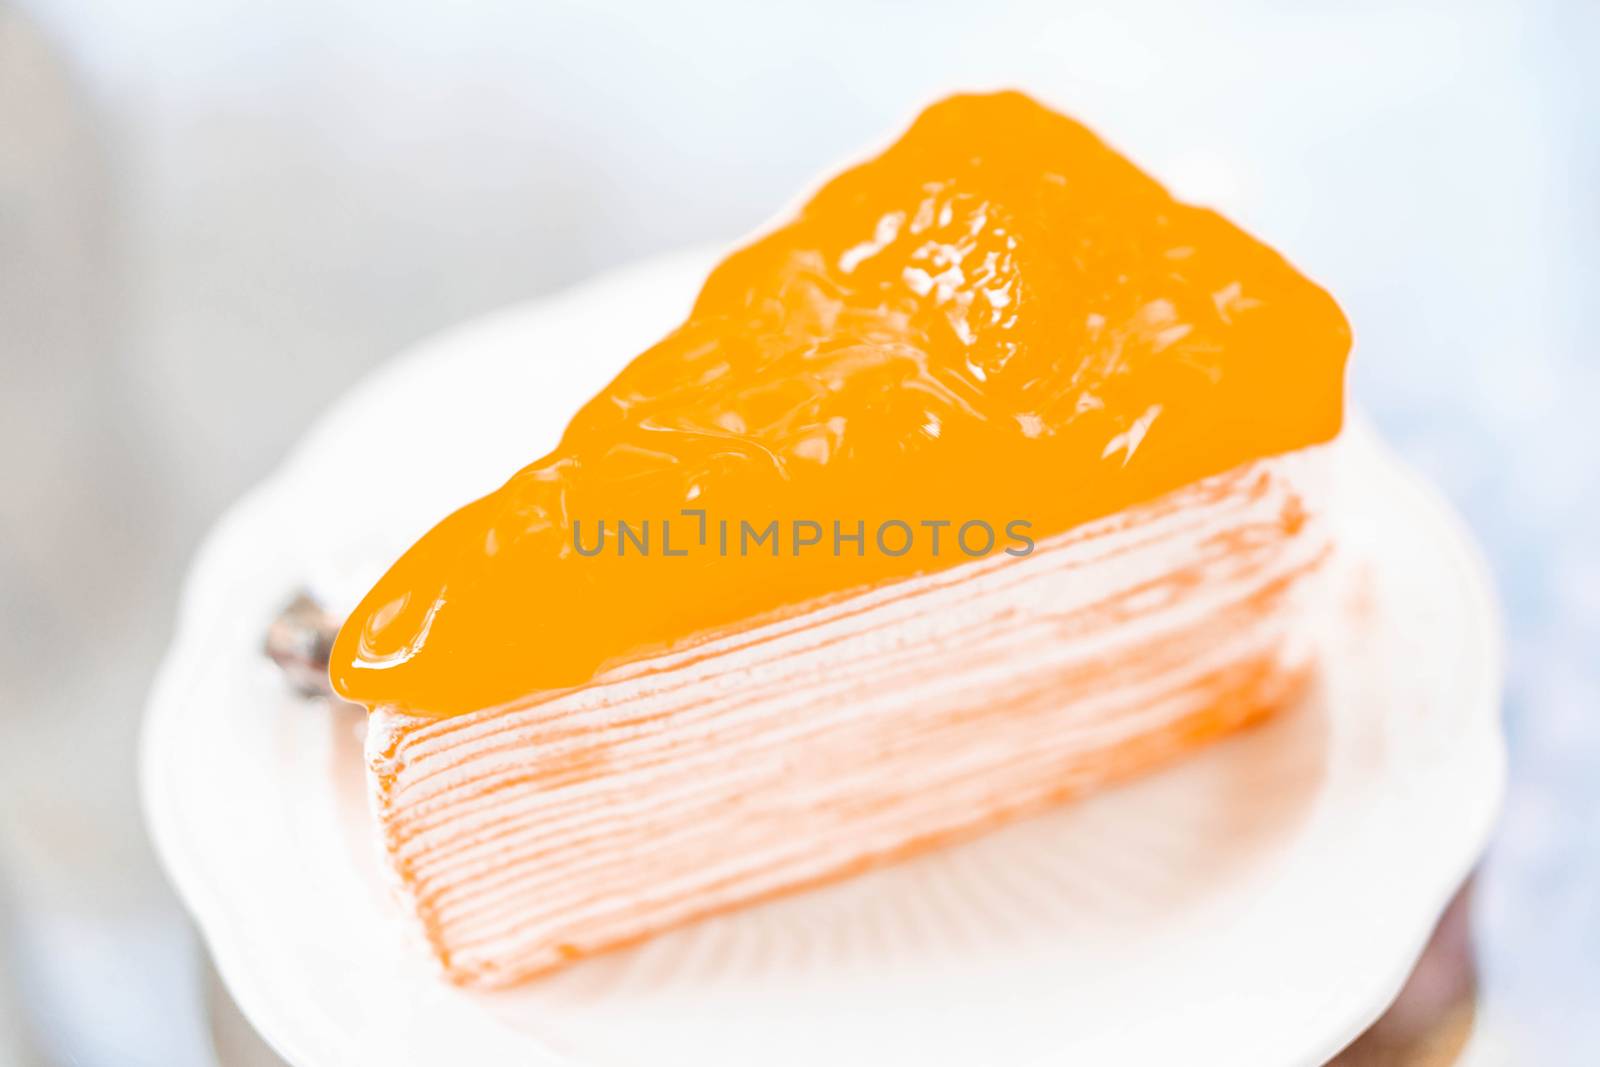 Closeup orange cake delicious on glass table background, selective focus